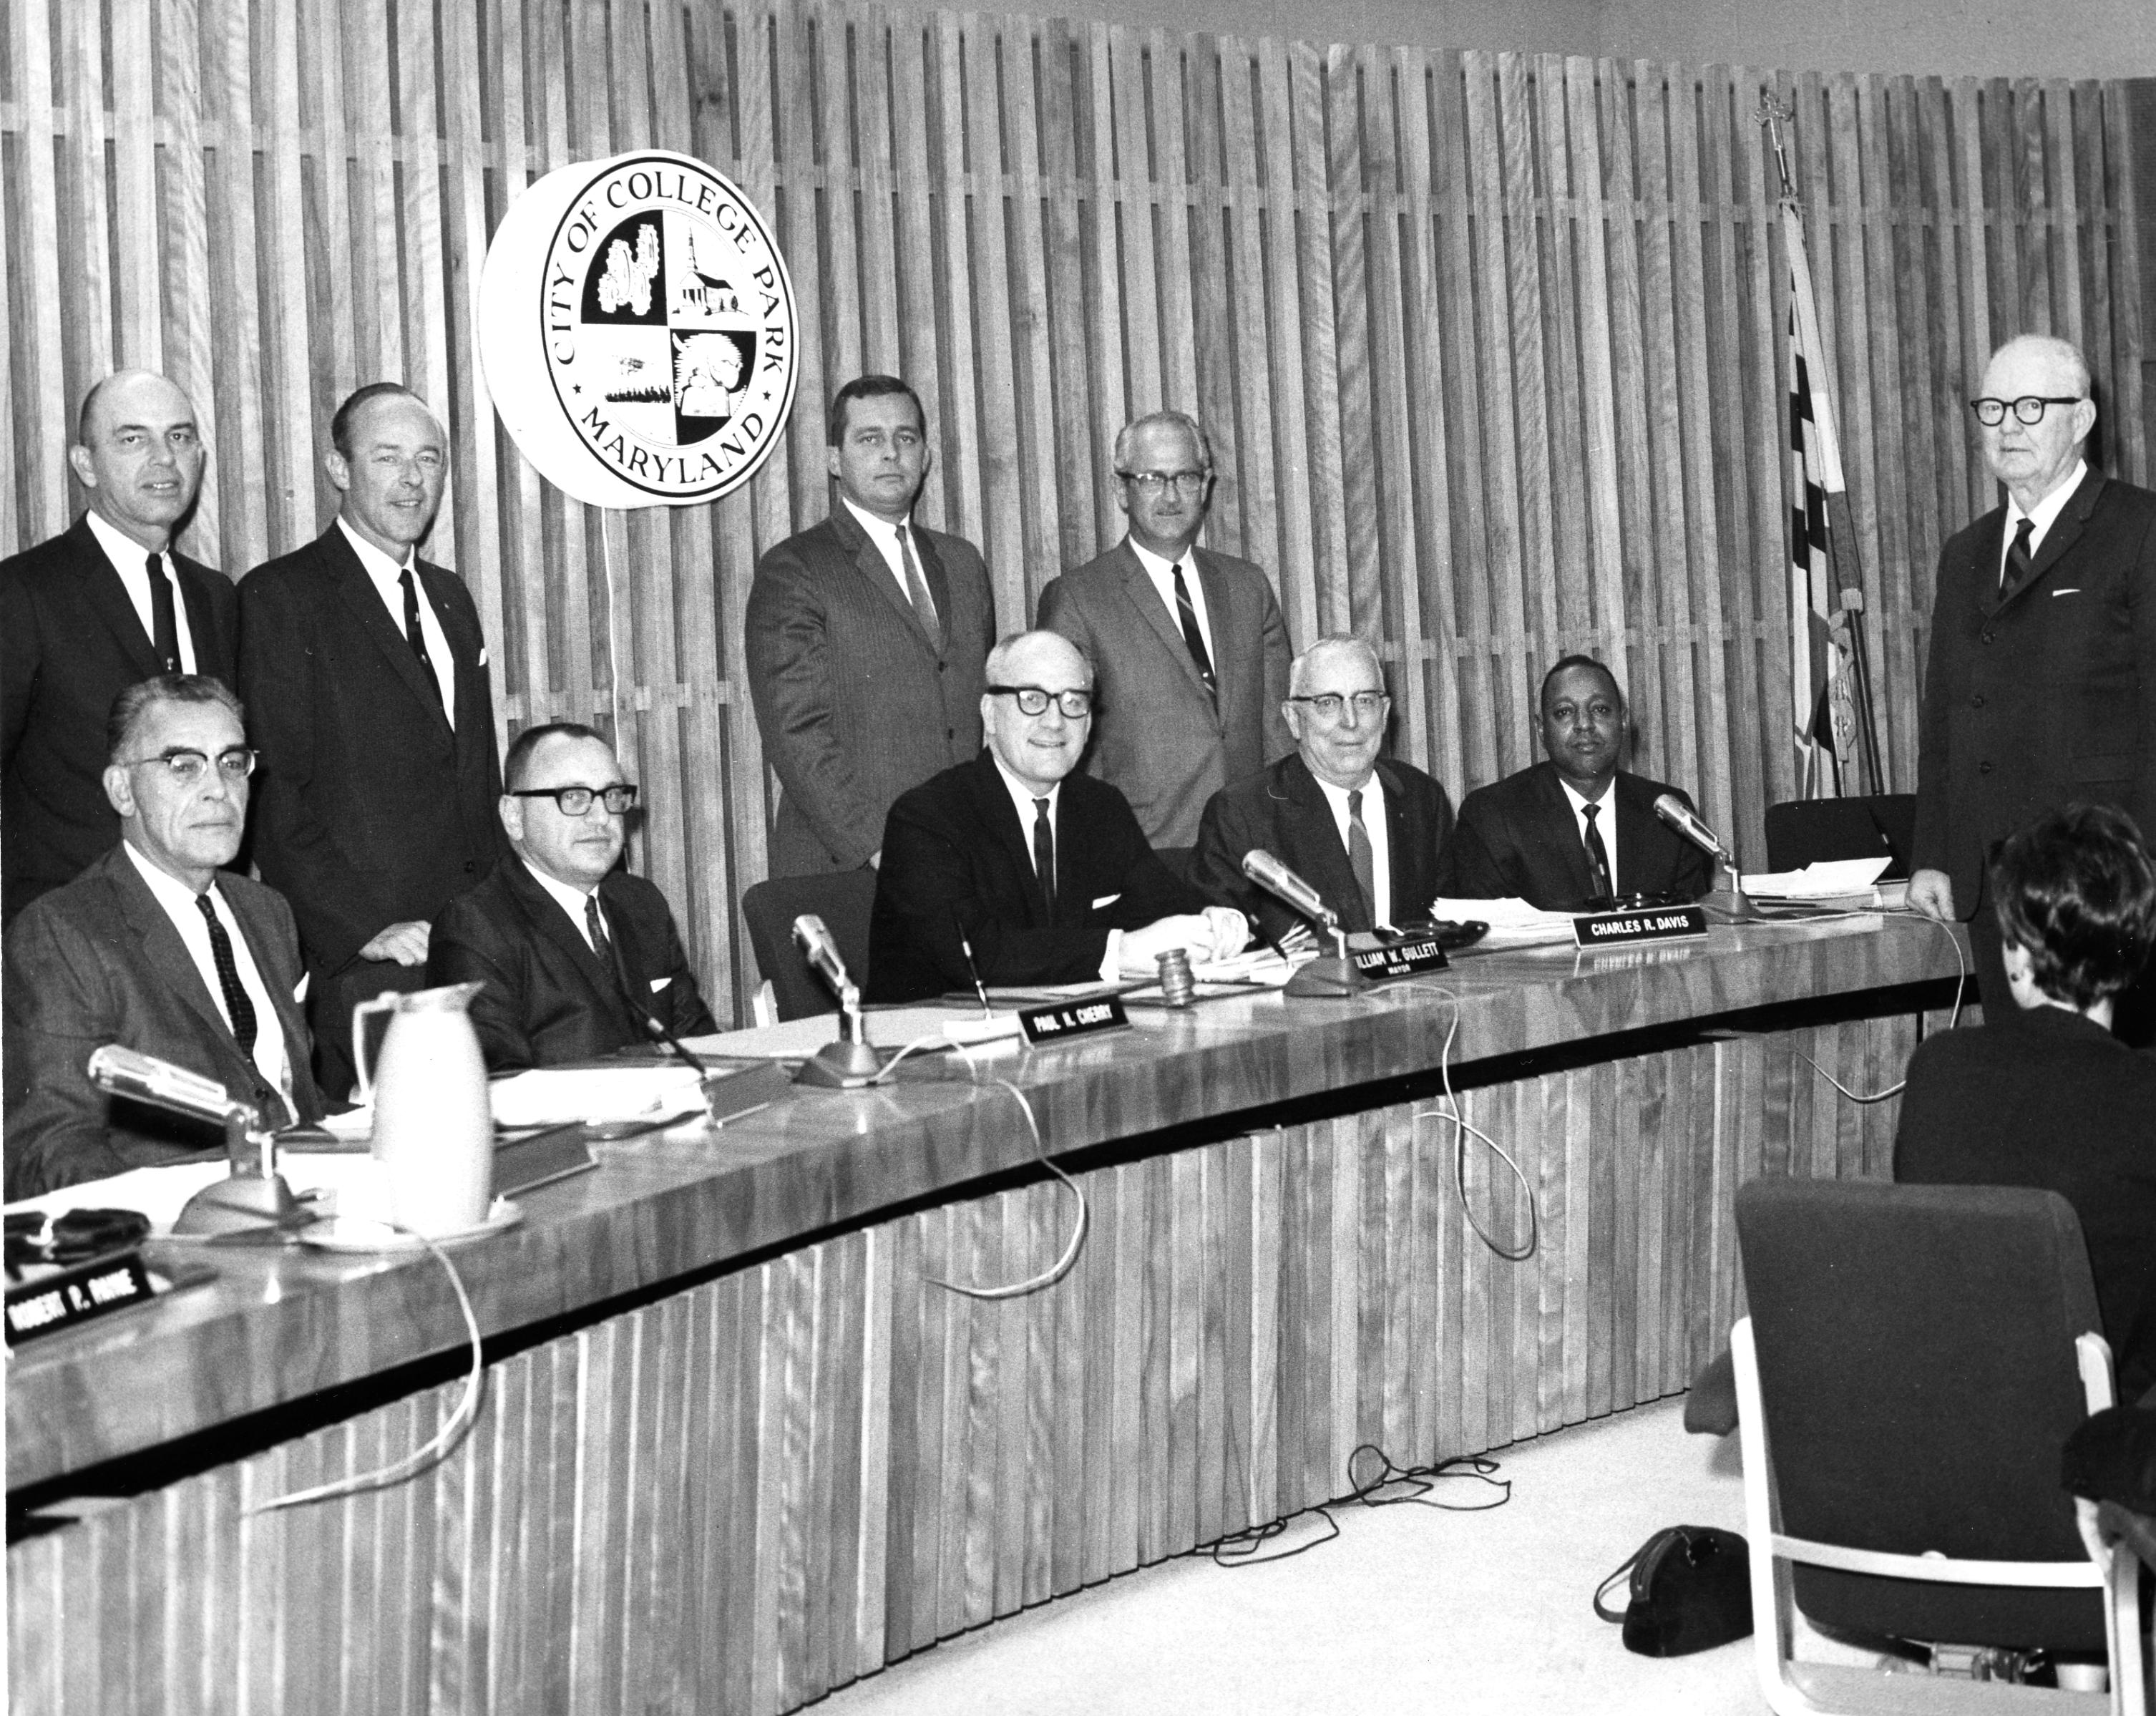 Lomax with Council 